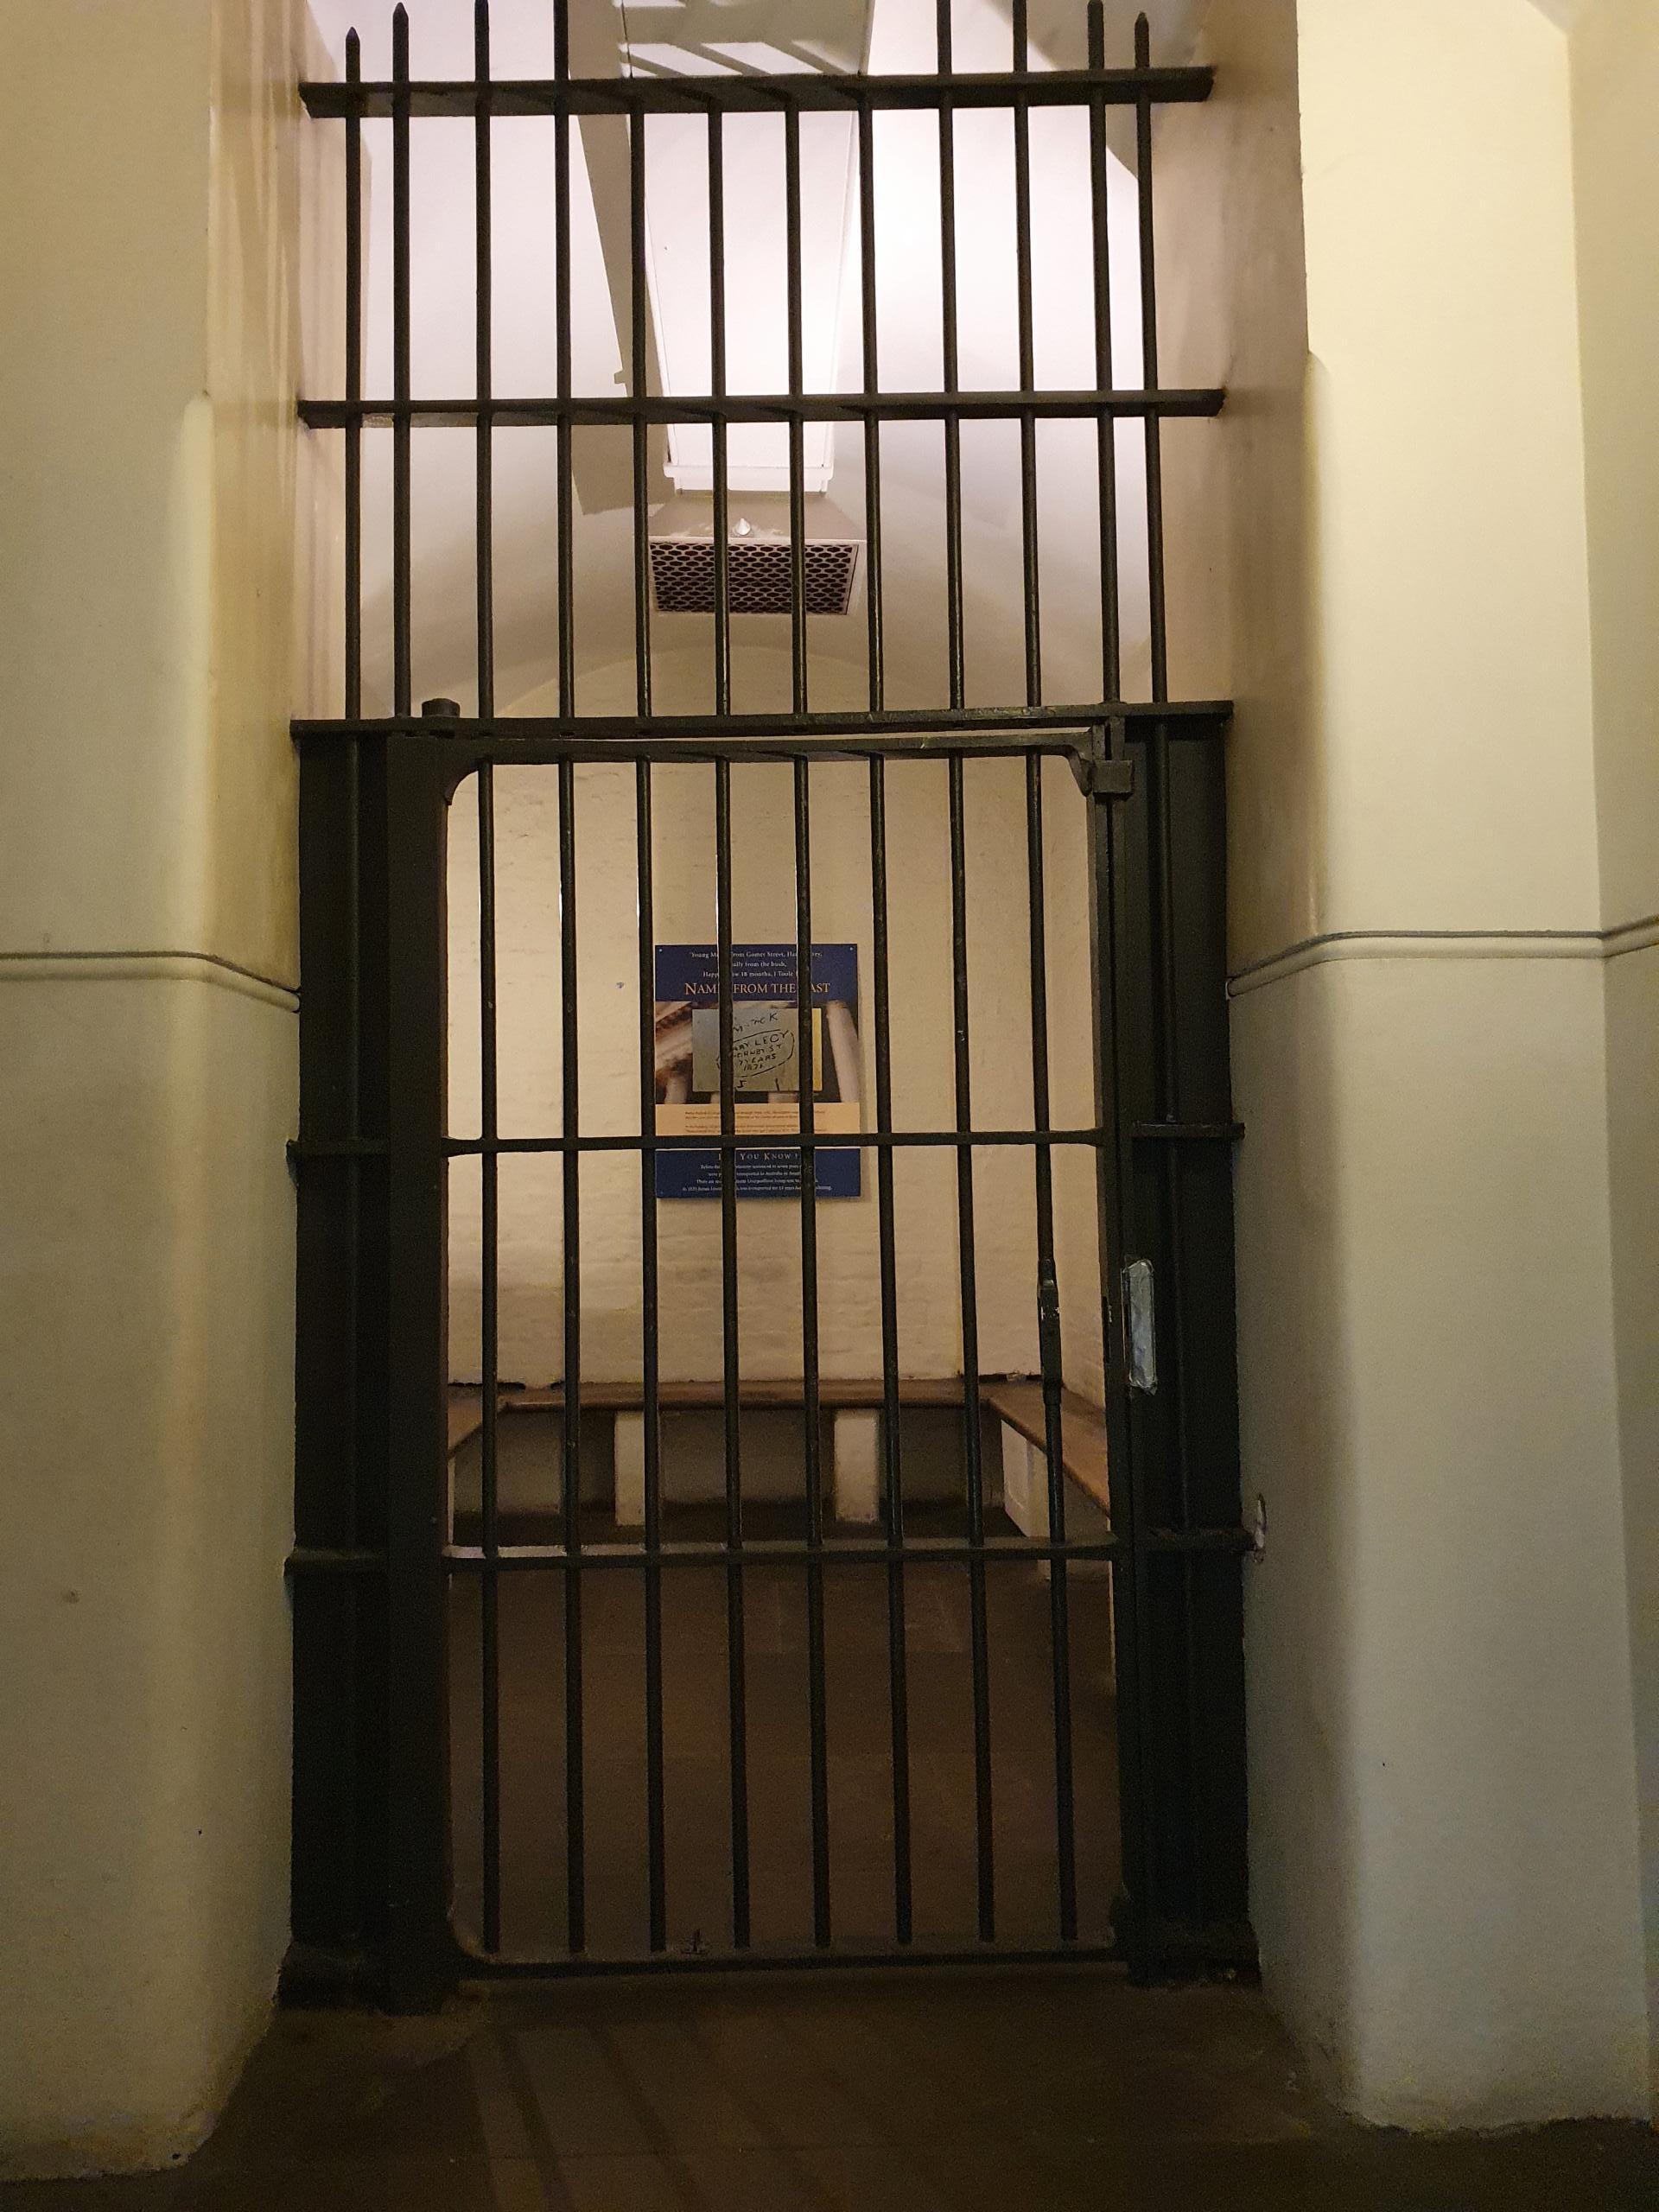 Prisoner Cell where Florence waited before the Jury’s verdict which took only 43 minutes. Here, she would have been able to hear the noise of the courtroom.